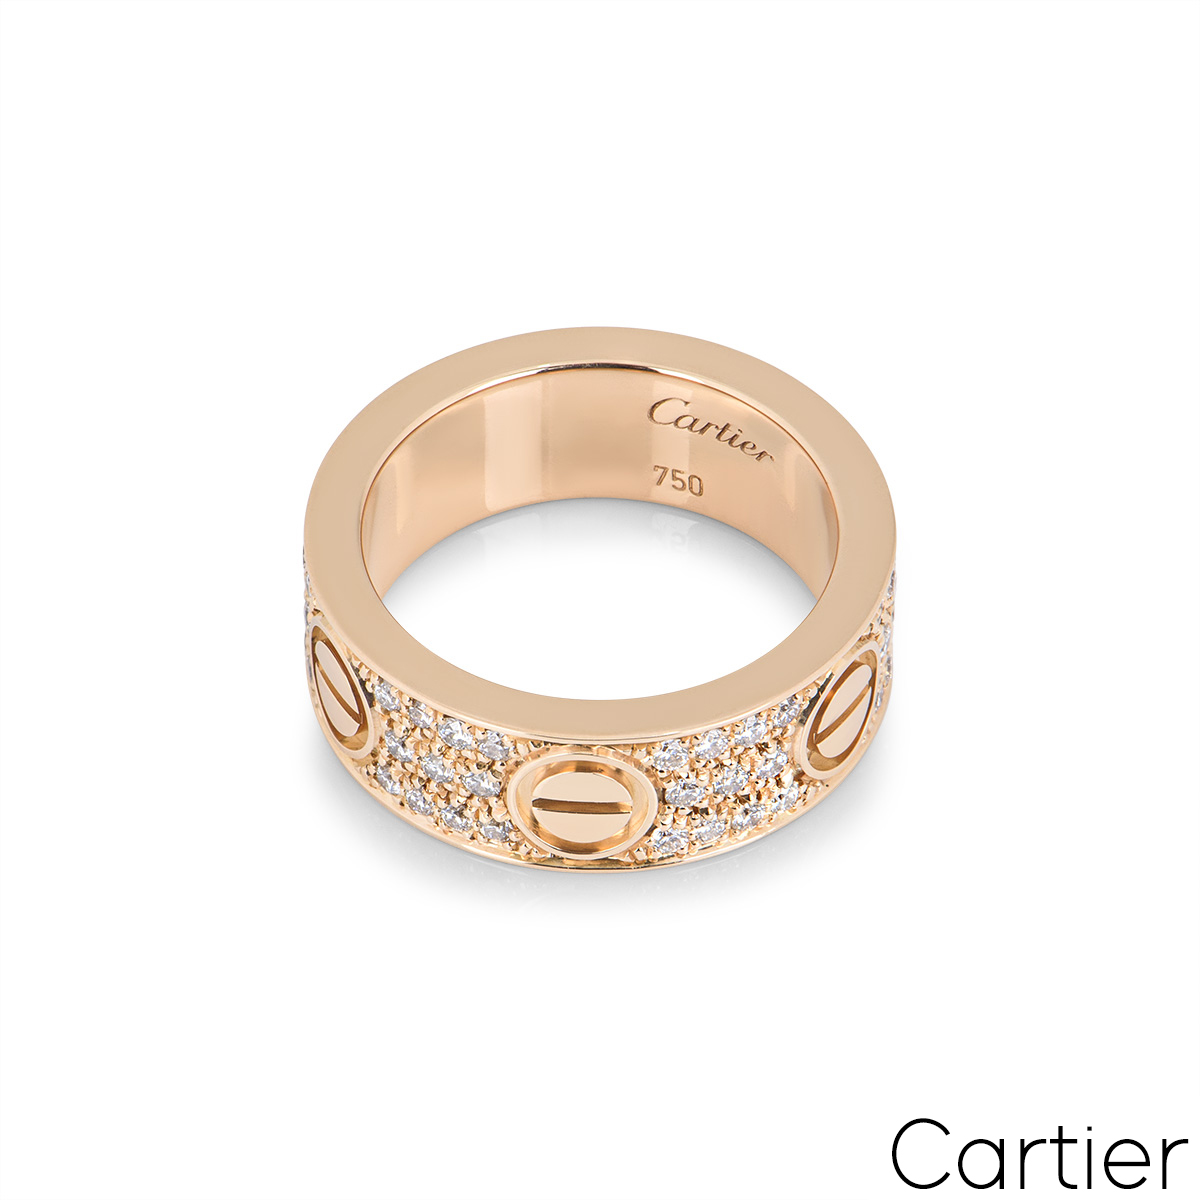 Cartier Rose Gold Pave Diamond Love Ring Size 56 B4087600